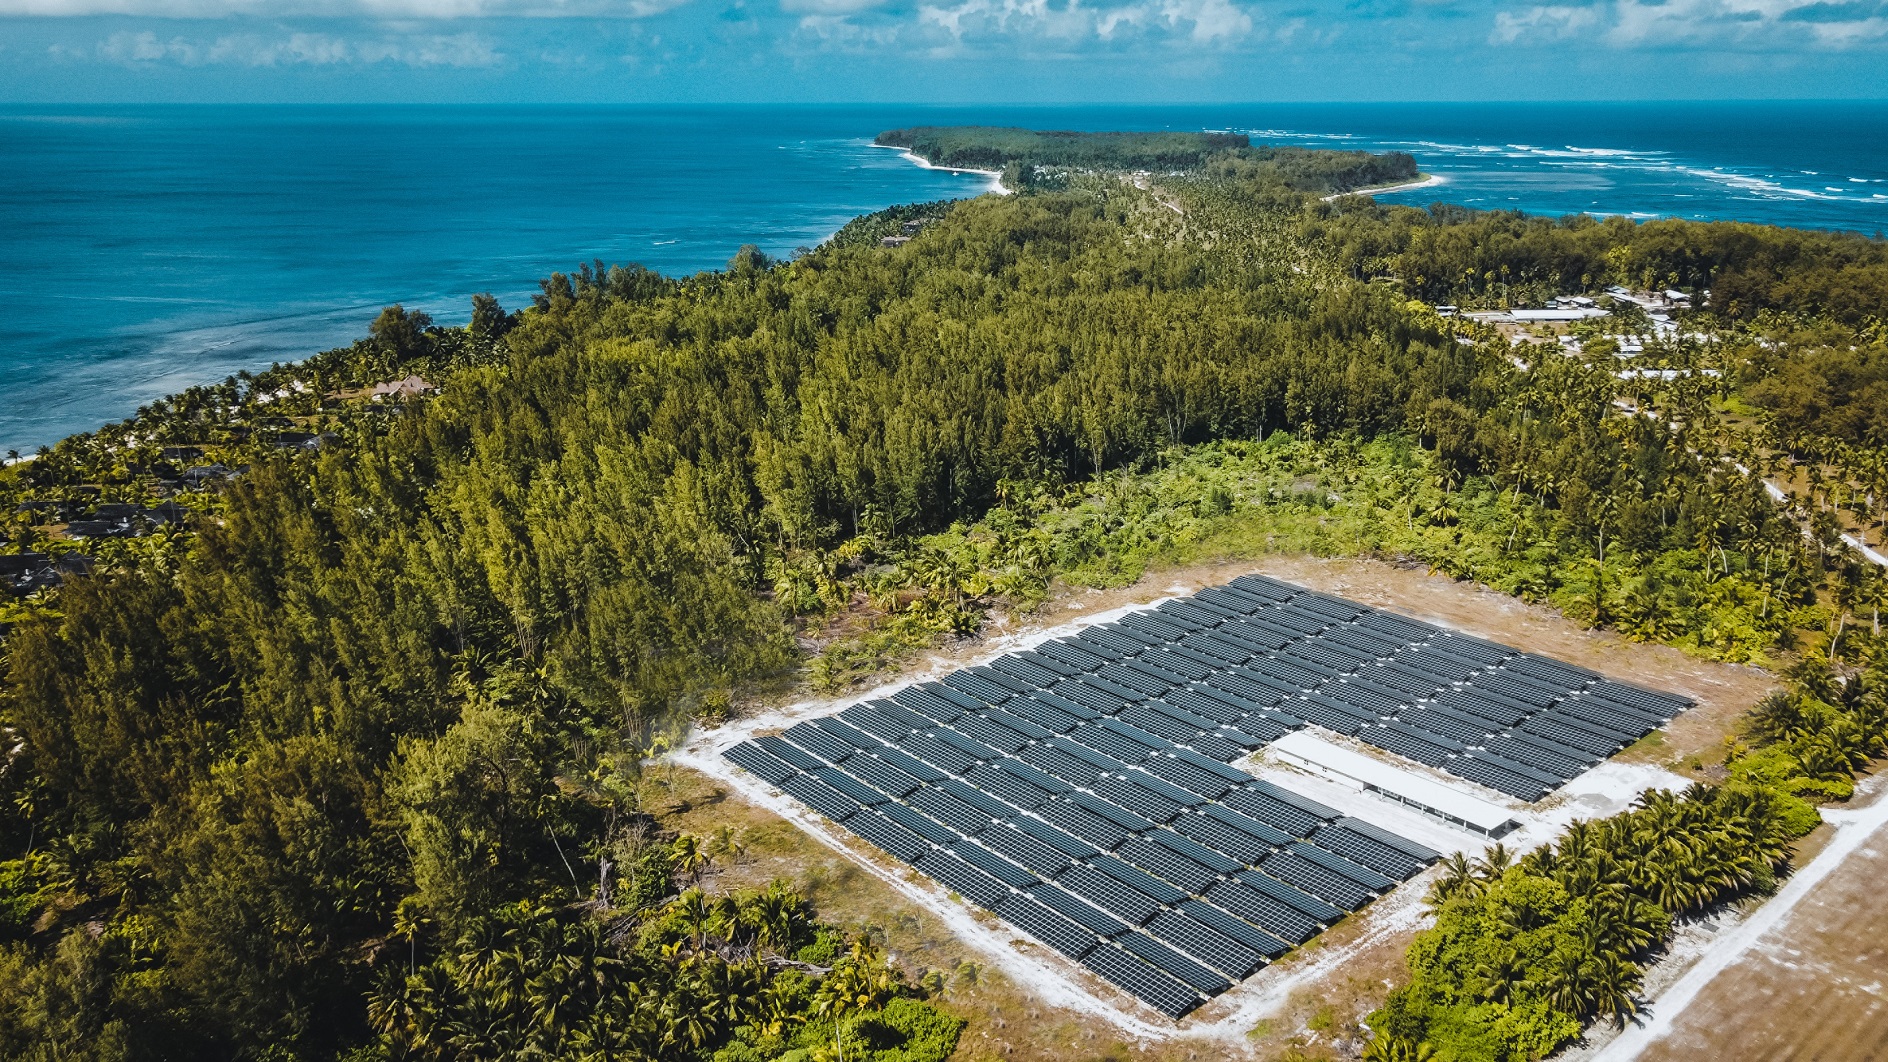 With more than 7,200 solar panels, the plant is capable of producing a minimum of 2,500 KW which will allow Four Seasons Resort Seychelles at Desroches Island – the only resort on the 6.5 kilometre (4 mile) long coral island in the Outer Amirantes – to reduce its dependency on Caterpillar diesel generators by 85 percent. Click to enlarge.